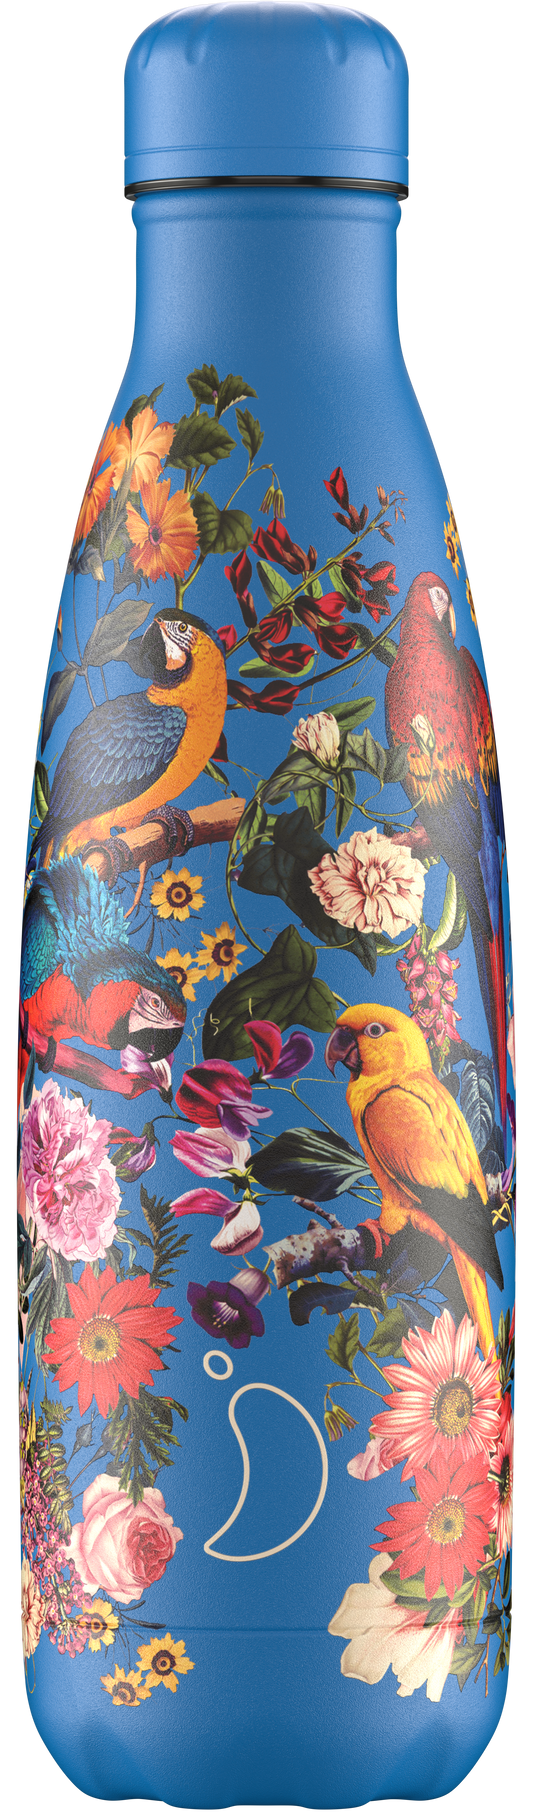 Chilly's Bottle Tropical Edition 500ml - Parrot Blooms